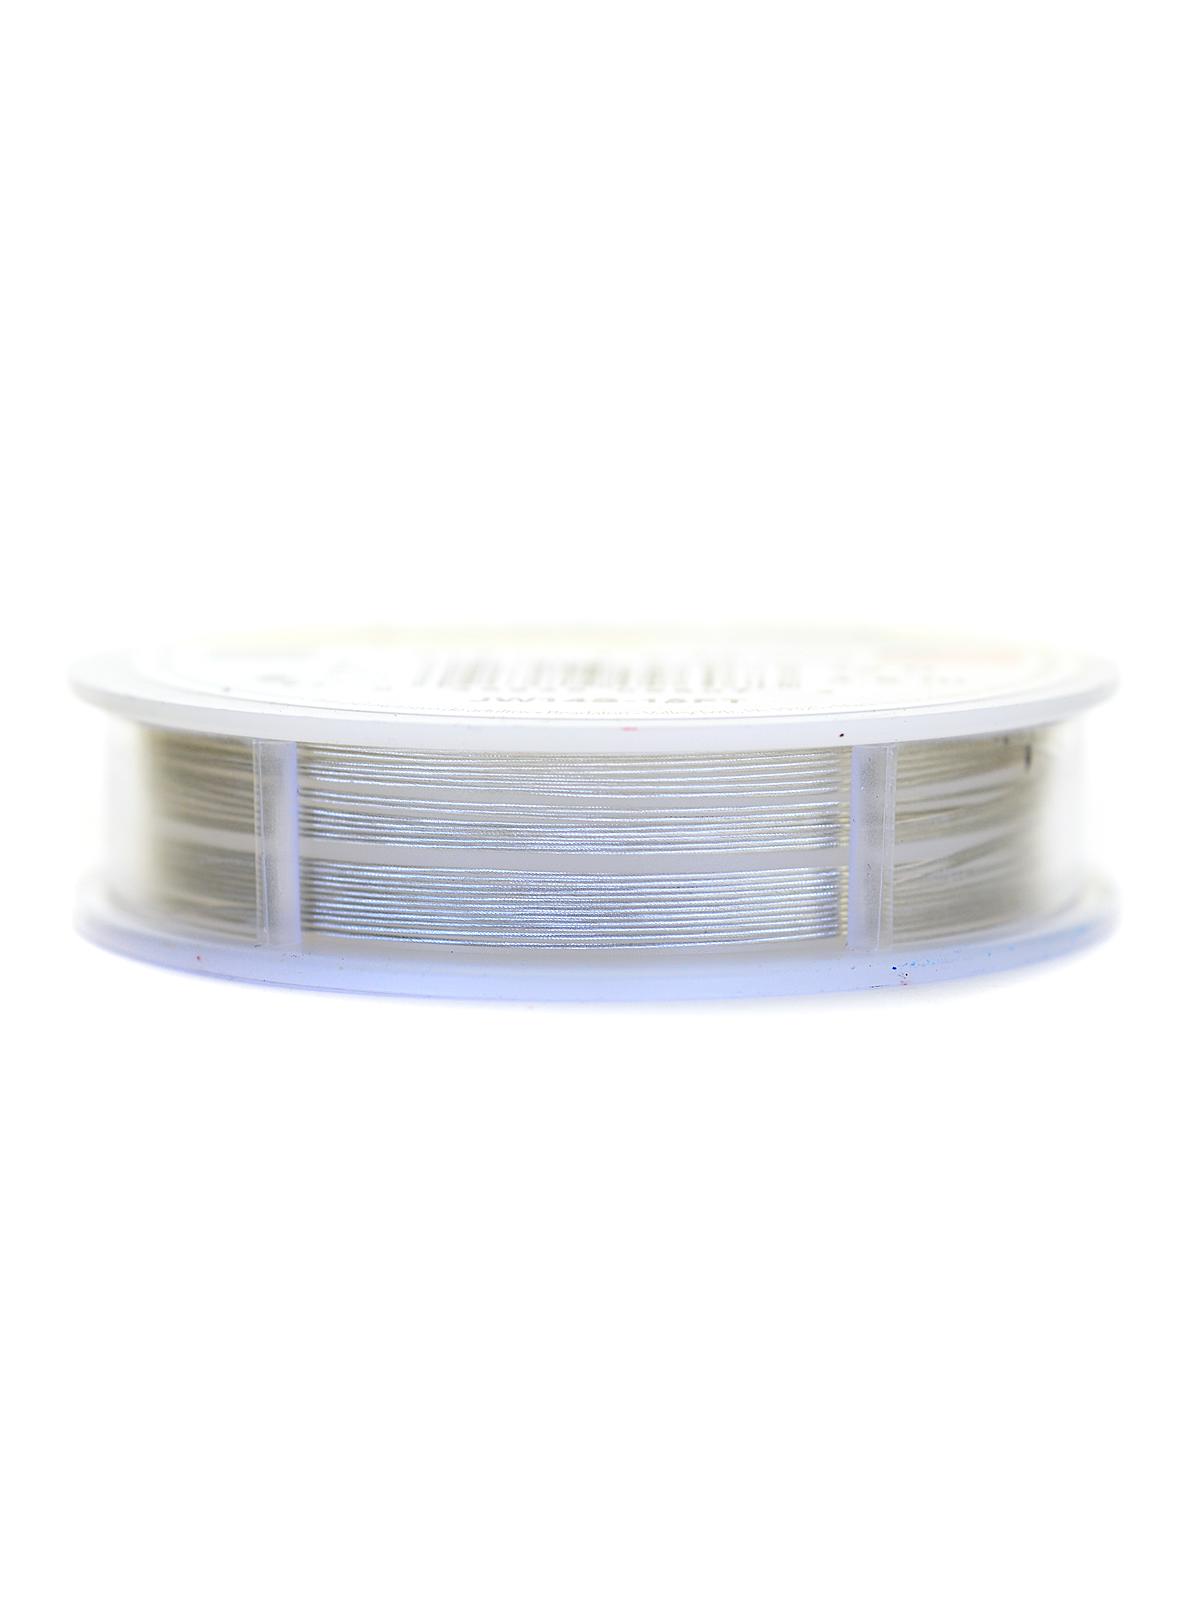 19 Strand Bead Stringing Wire Metallic Silver Color .015 In. (0.38 Mm) 15 Ft. Spool